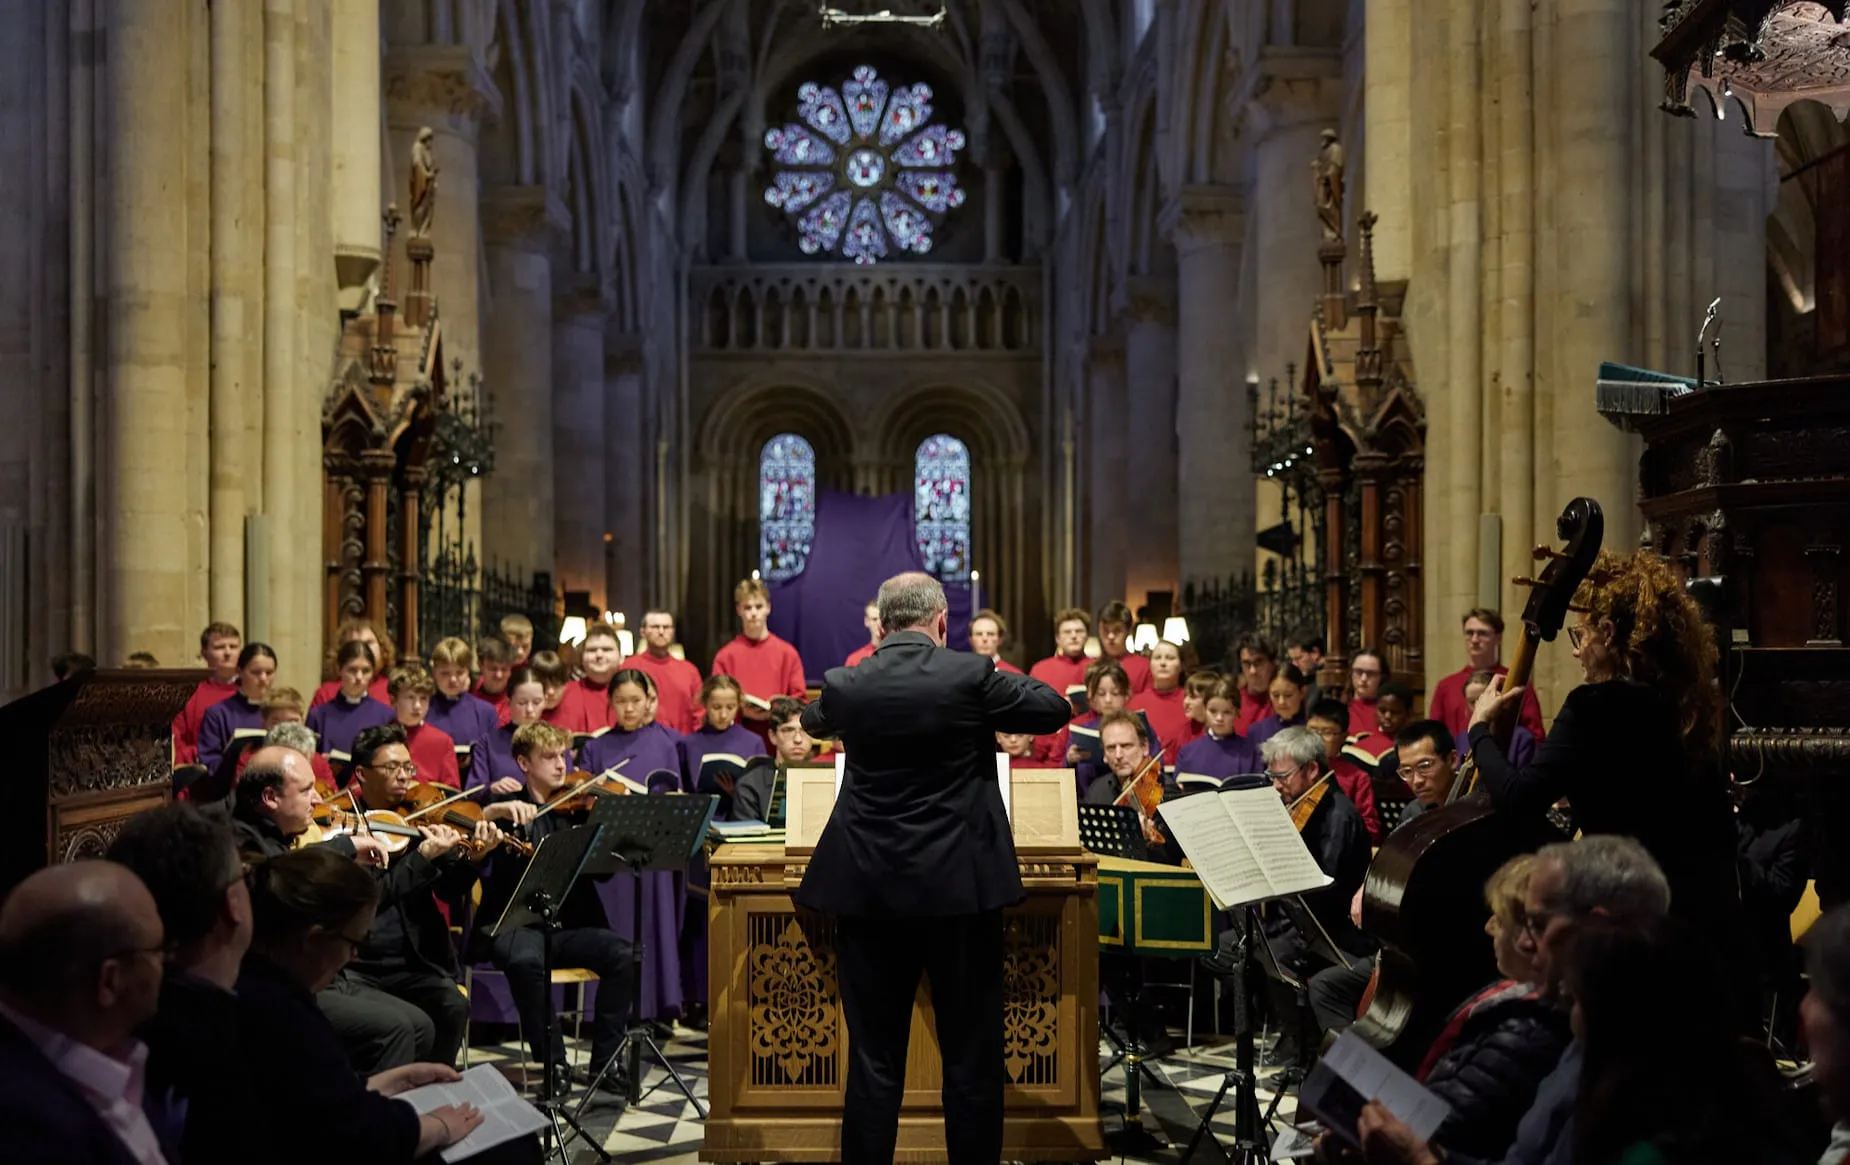 The choirs and orchestra performing Bach in the Cathedral